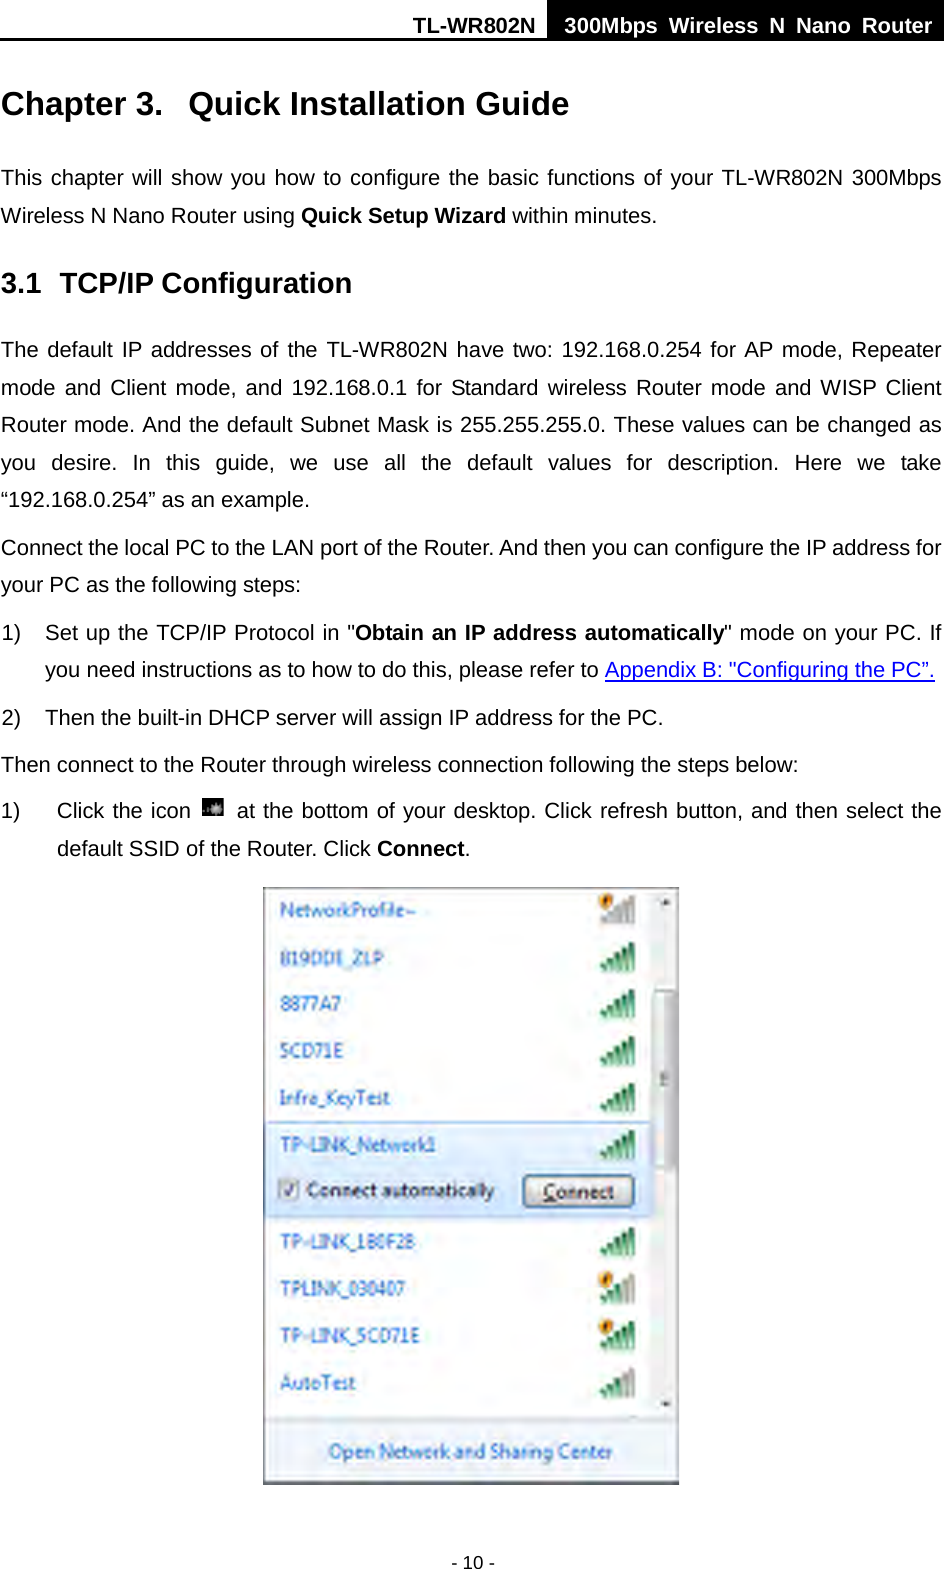 TL-WR802N  300Mbps Wireless N Nano Router  Chapter 3.  Quick Installation Guide This chapter will show you how to configure the basic functions of your TL-WR802N 300Mbps Wireless N Nano Router using Quick Setup Wizard within minutes. 3.1 TCP/IP Configuration The default IP addresses of the TL-WR802N have two: 192.168.0.254 for AP mode, Repeater mode and Client mode, and 192.168.0.1 for Standard wireless Router mode and WISP Client Router mode. And the default Subnet Mask is 255.255.255.0. These values can be changed as you desire.  In this guide,  we use all  the default values for description.  Here we take “192.168.0.254” as an example. Connect the local PC to the LAN port of the Router. And then you can configure the IP address for your PC as the following steps: 1) Set up the TCP/IP Protocol in &quot;Obtain an IP address automatically&quot; mode on your PC. If you need instructions as to how to do this, please refer to Appendix B: &quot;Configuring the PC”. 2) Then the built-in DHCP server will assign IP address for the PC. Then connect to the Router through wireless connection following the steps below: 1) Click the icon   at the bottom of your desktop. Click refresh button, and then select the default SSID of the Router. Click Connect.    - 10 - 